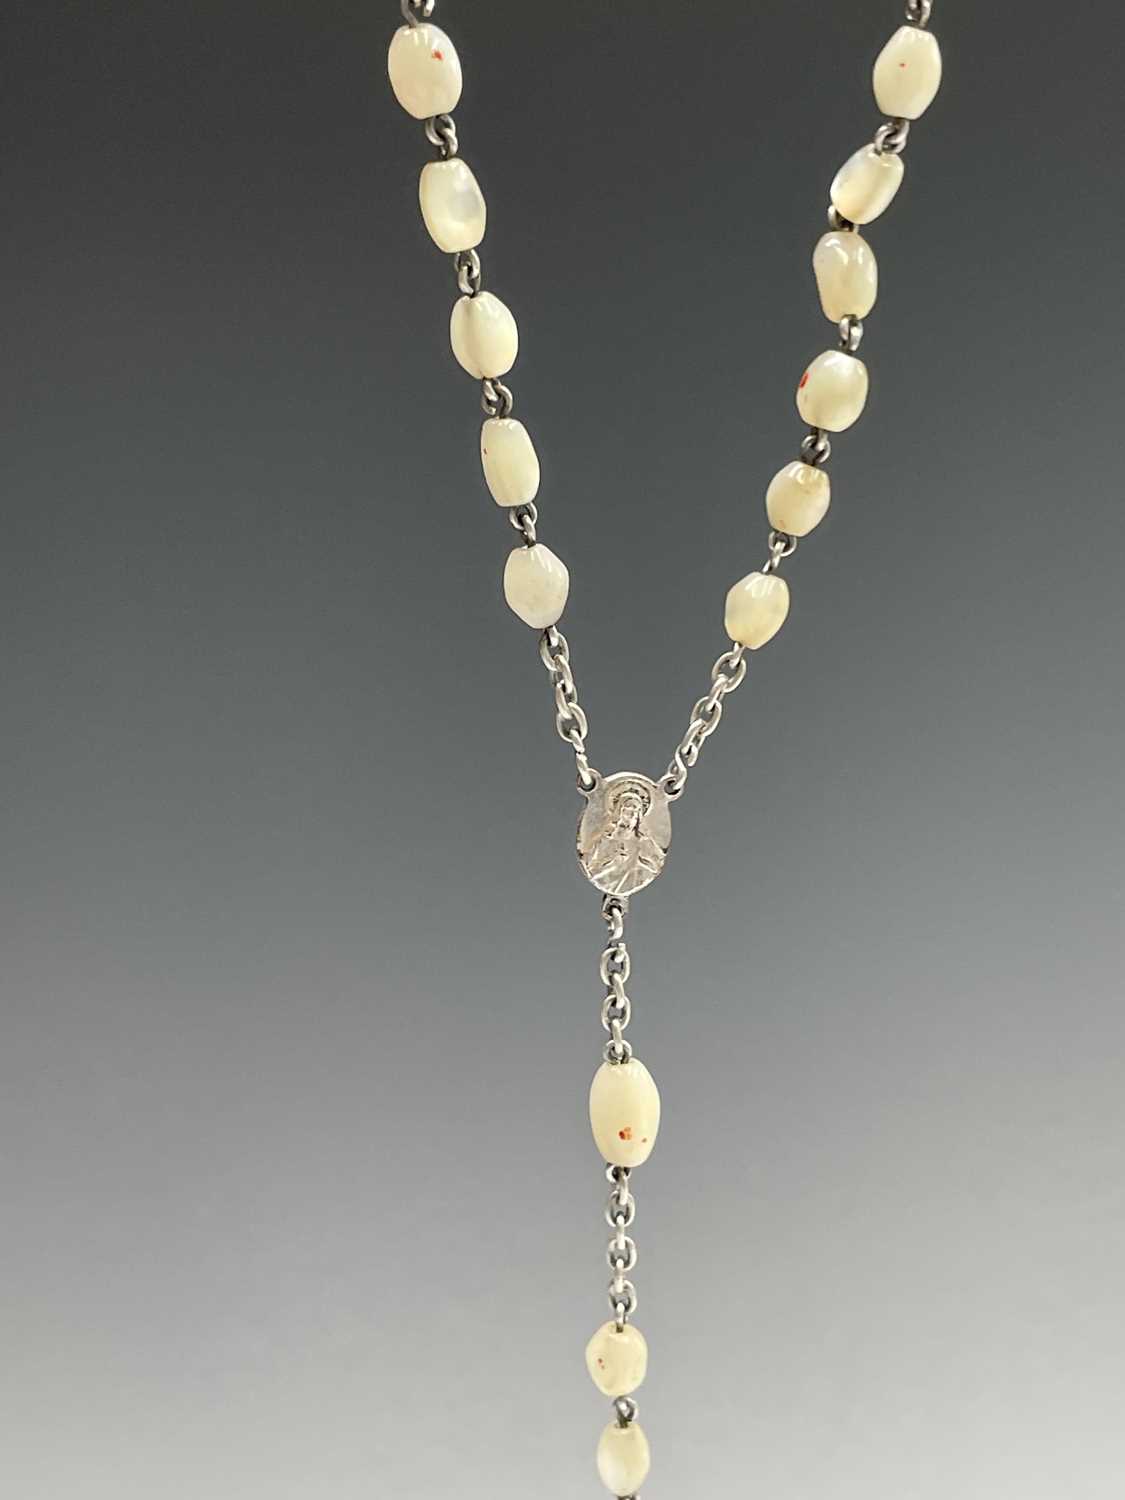 Fifteen rosary bead necklaces, all with unique decorative crosses. - Image 15 of 20